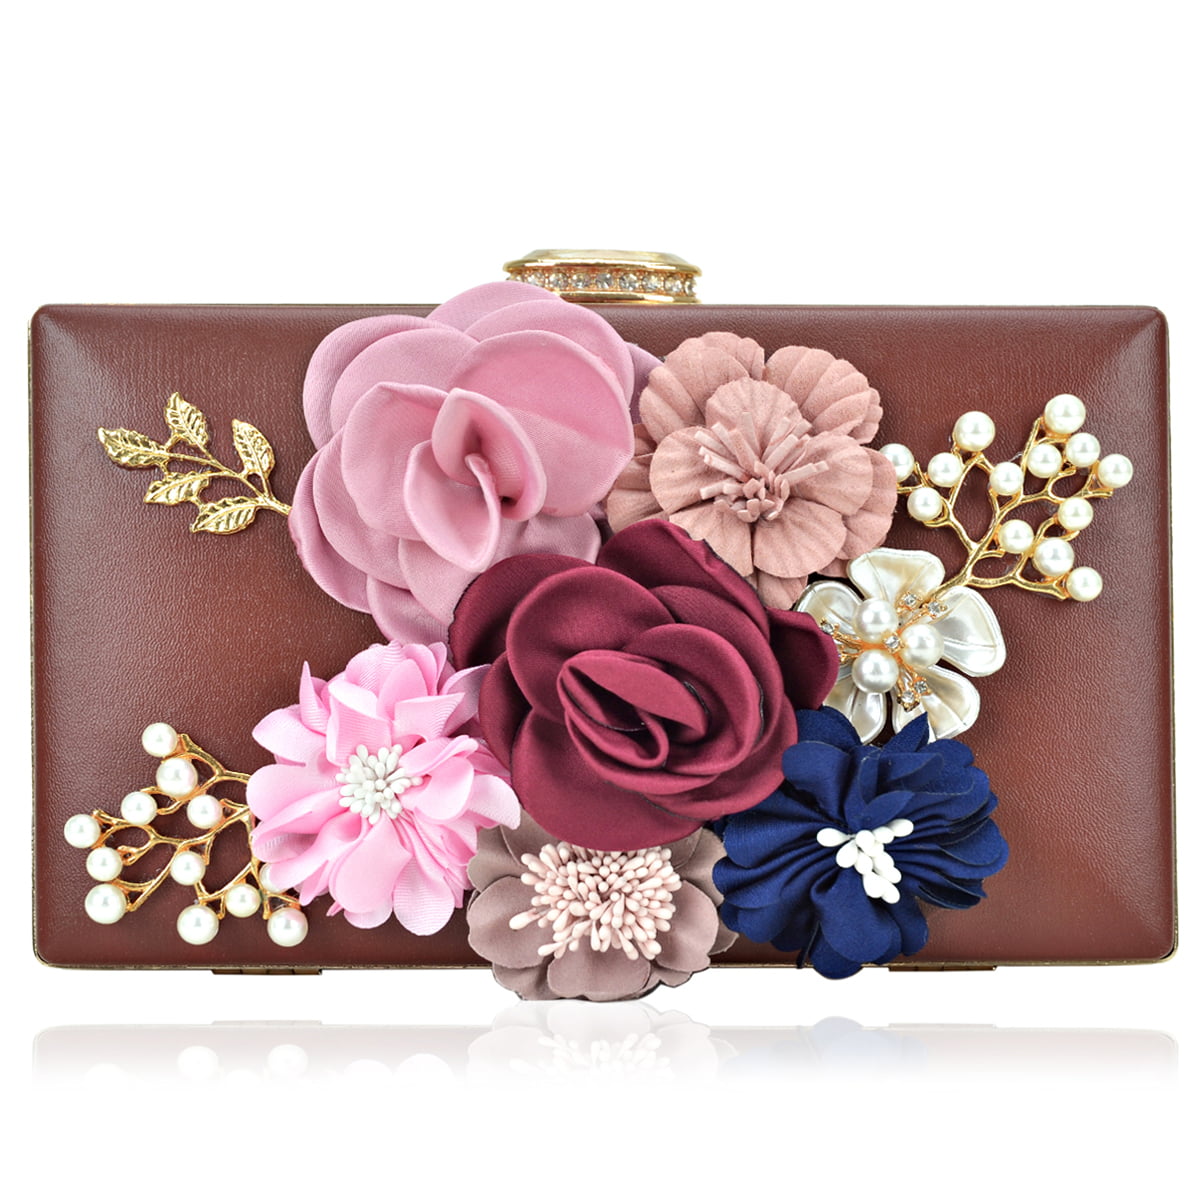 HWX Womens Flower Clutches Handbags Evening Bags Prom Party Wedding Cocktail Clutch Purses with Pearls Beaded,Gold,42012cm